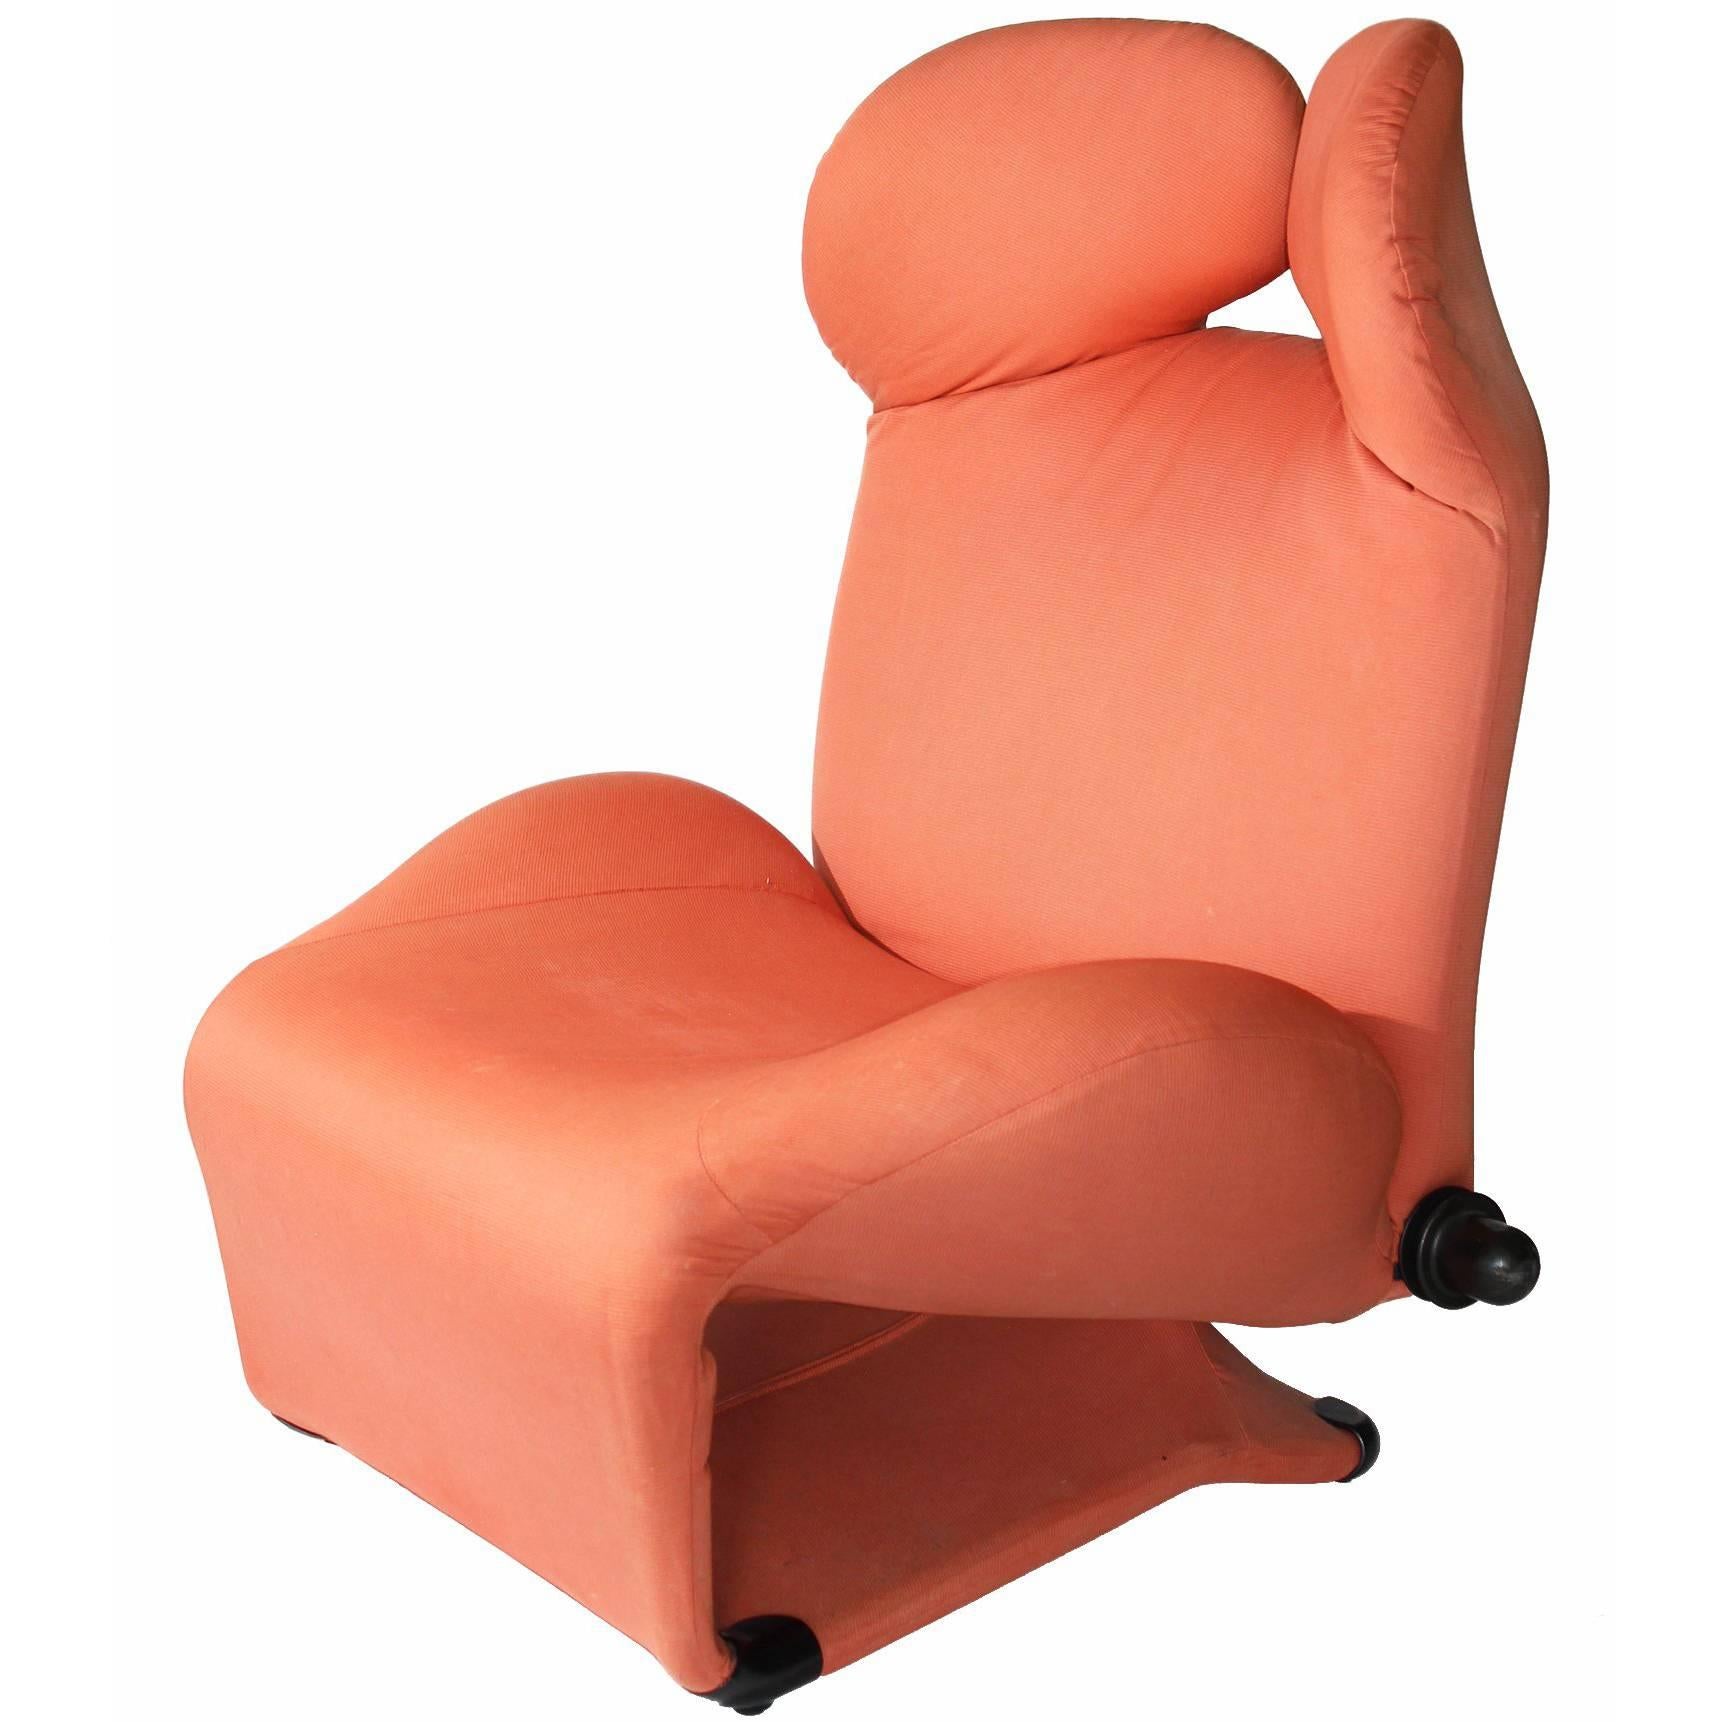 1980s Toshiyuki Kita 'Wink' Convertible Fabric Lounge Chair by Cassina, Italy